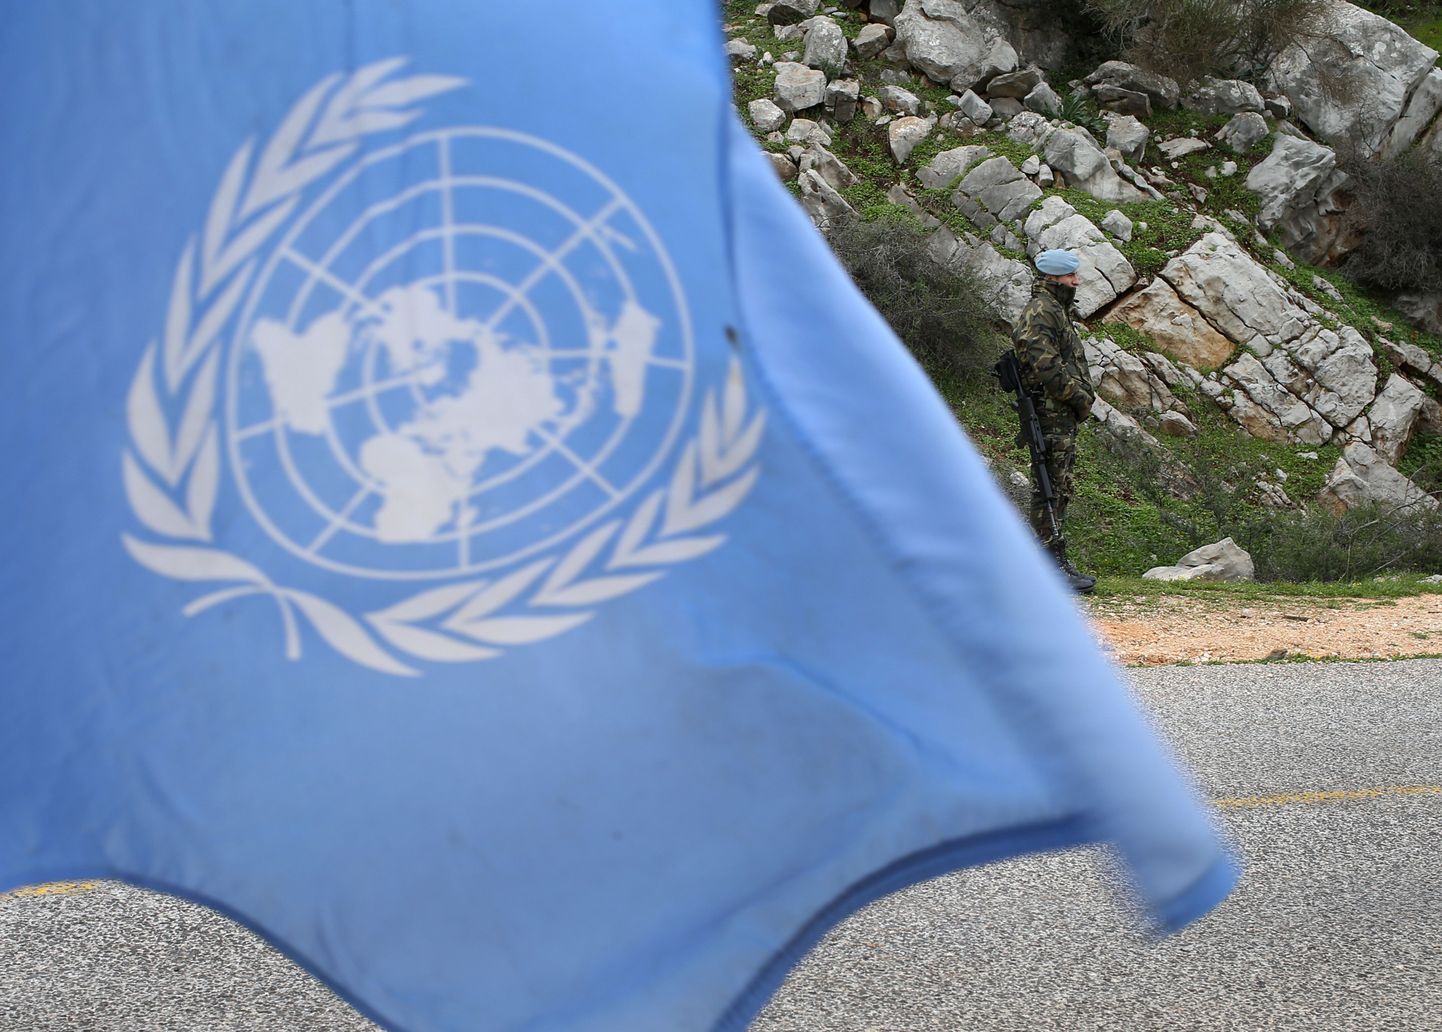 A United Nations flag waves as Spanish U.N. peacekeepers carry out a foot patrol in the disputed Chebaa Farms area between Lebanon and Israel, in southeast Lebanon, Tuesday Feb. 24, 2015. A Spanish peacekeeper was killed in south Lebanon last month during a flare-up in hostilities between Israel and Hezbollah. The U.N. peacekeeping force known as UNIFIL has been deployed in south Lebanon since 1978 and monitors the border between Lebanon and Israel. (AP Photo/Hussein Malla)